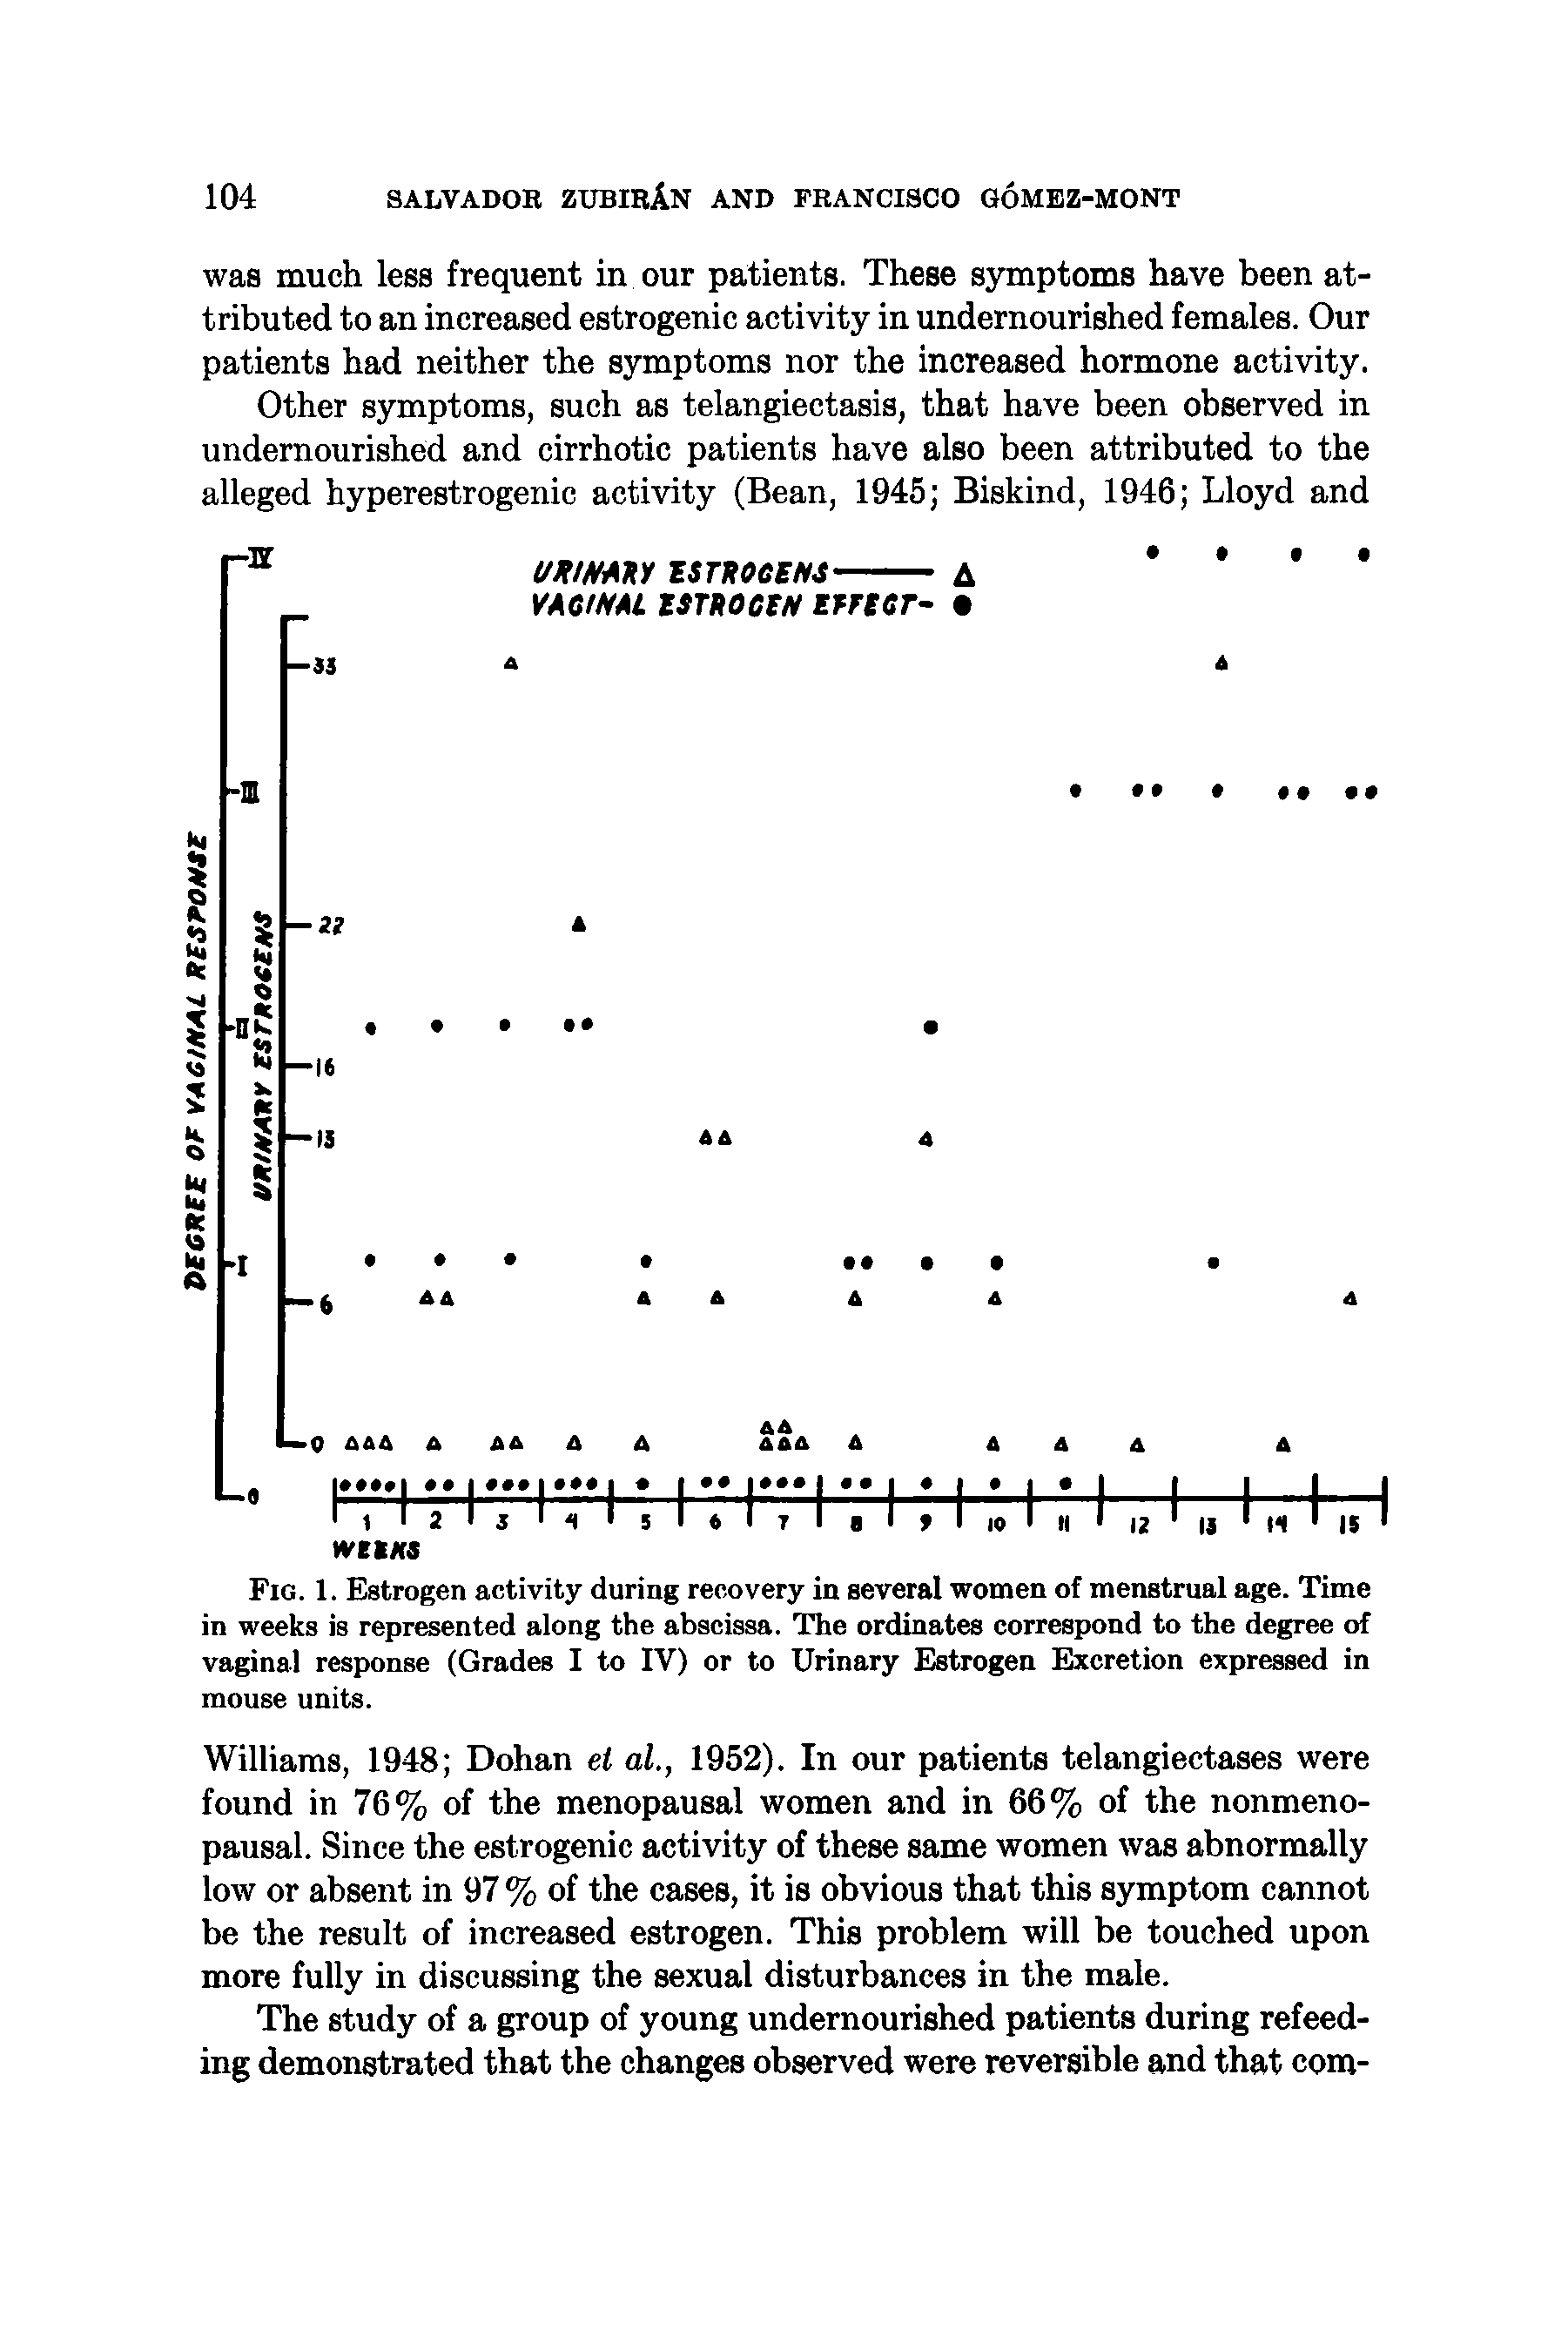 Fig. 1. E)strogen activity during recovery in several women of menstrual age. Time in weeks is represented along the abscissa. The ordinates correspond to the degree of vaginal response (Grades I to IV) or to Urinary Estrogen Excretion expressed in mouse units.